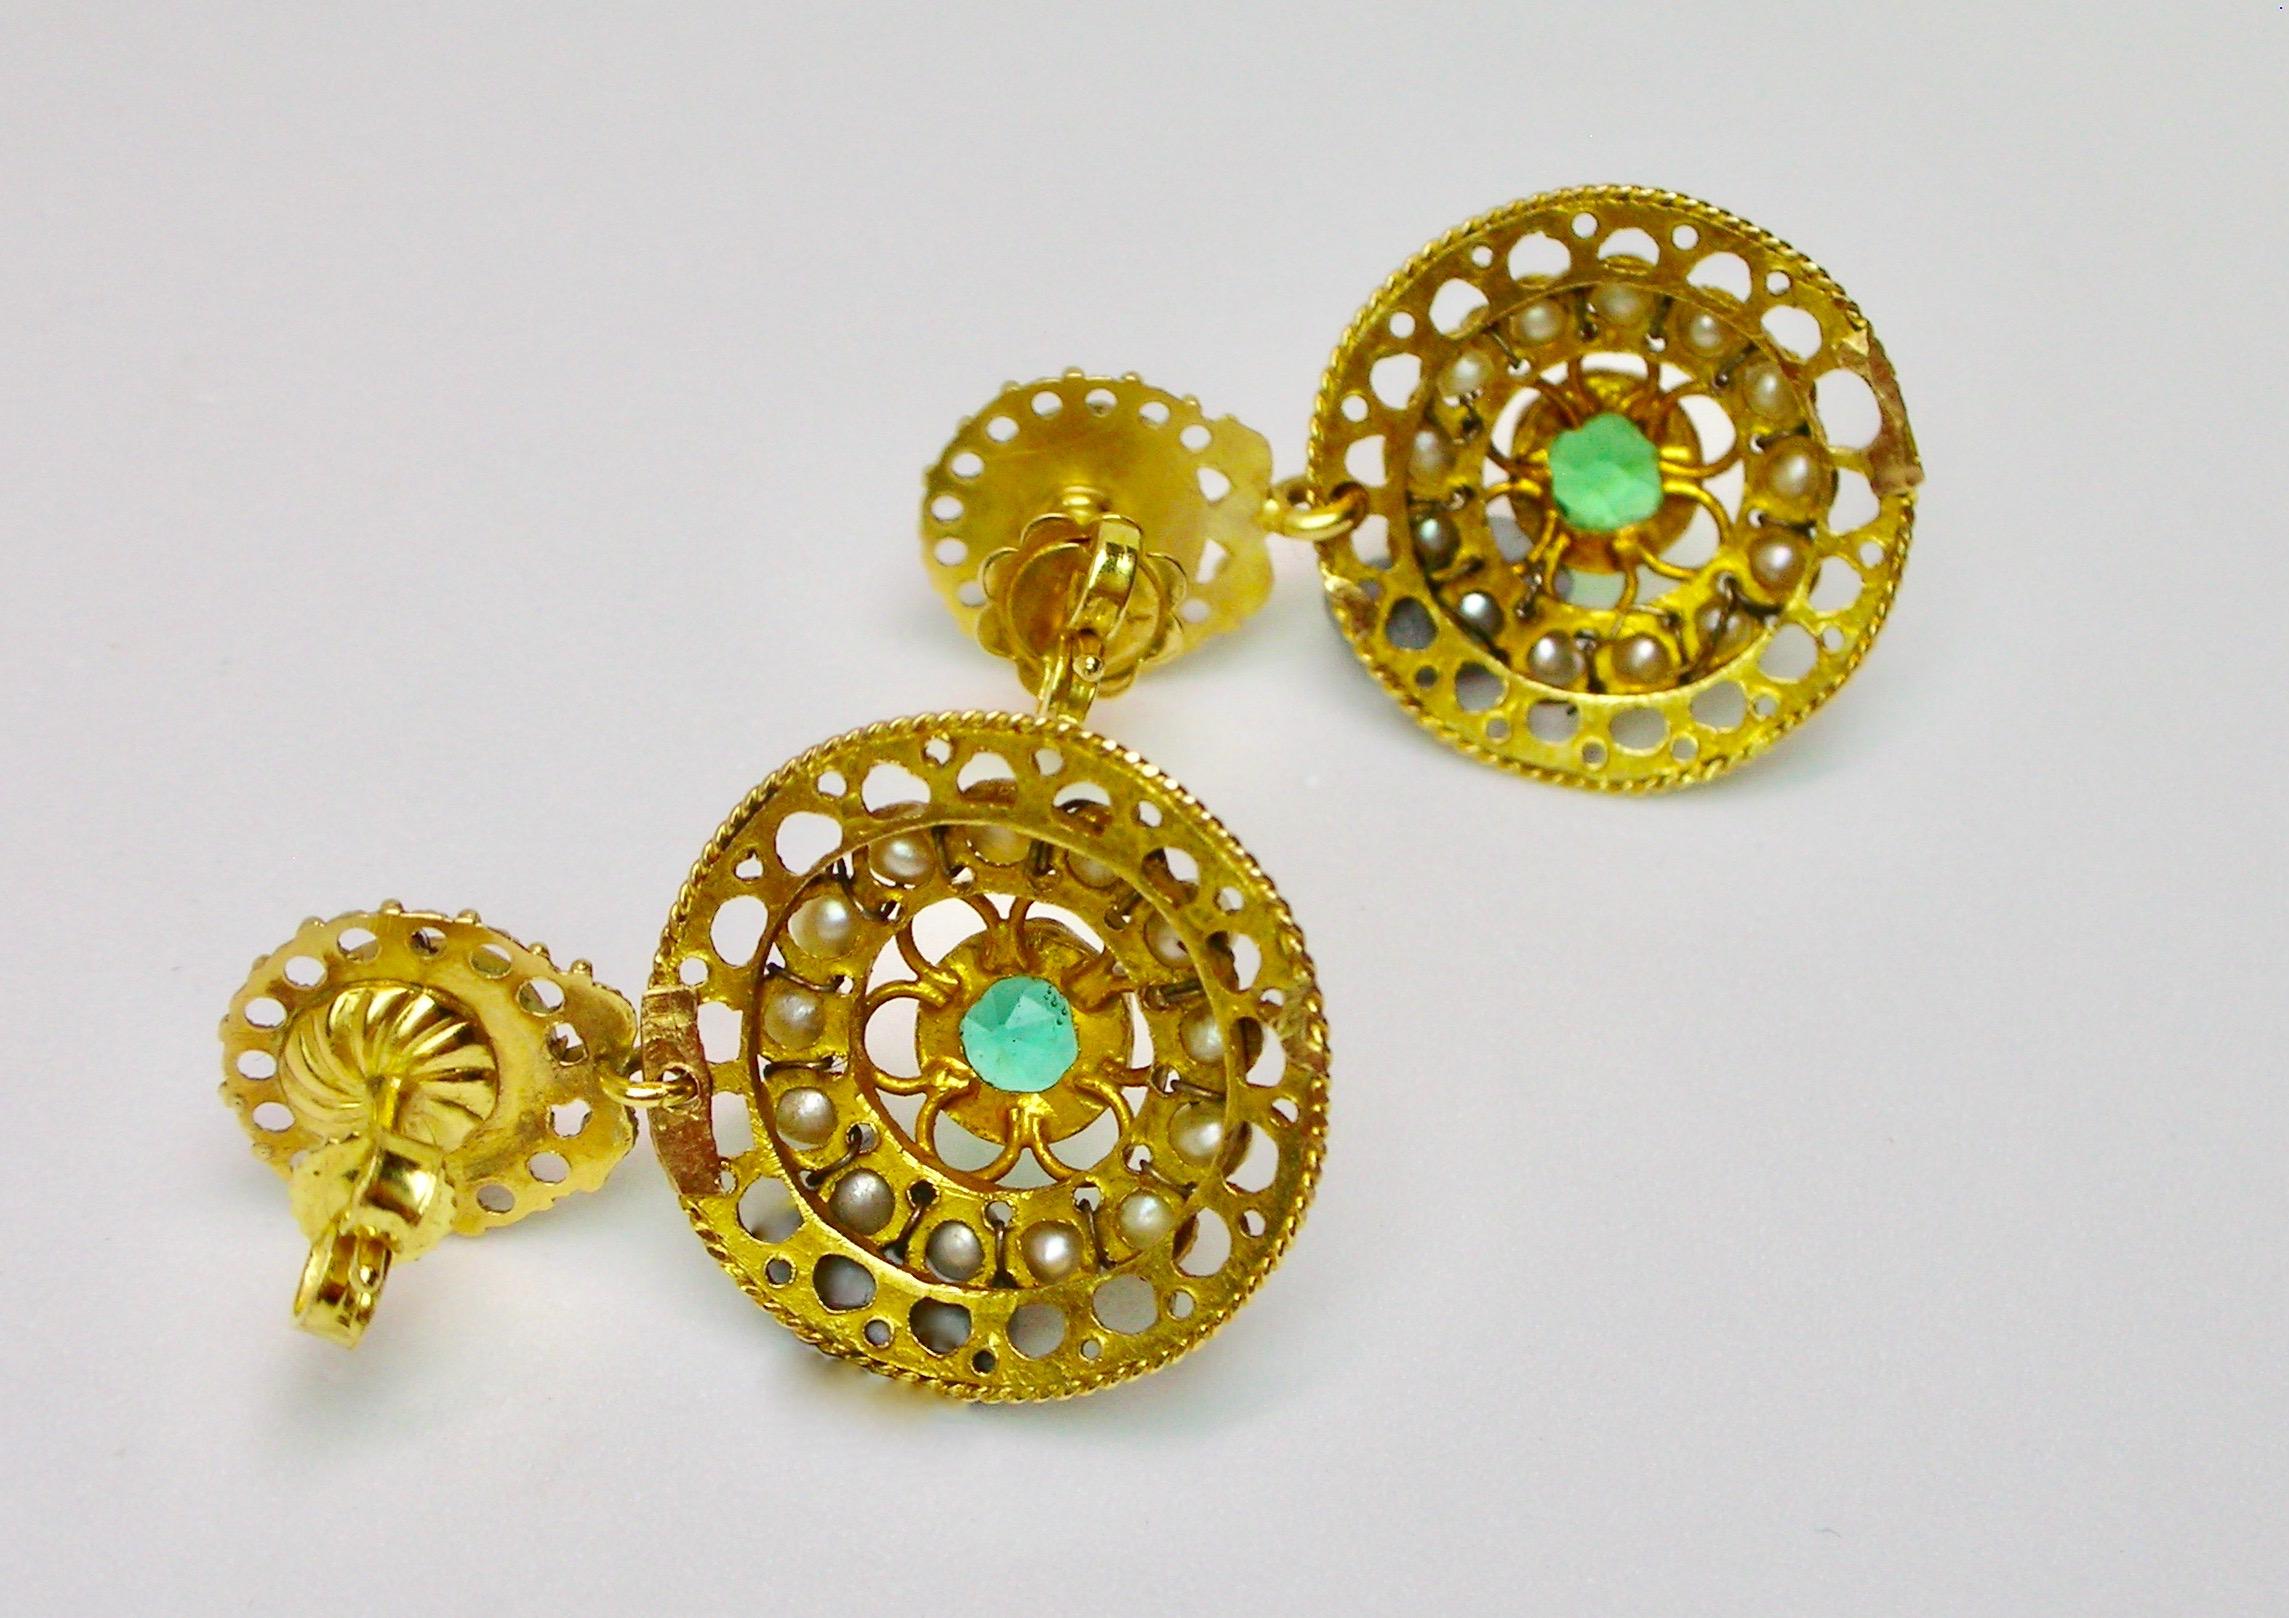 Gold earrings with natural pearls and green paste, probably from the end of the 19th Century.